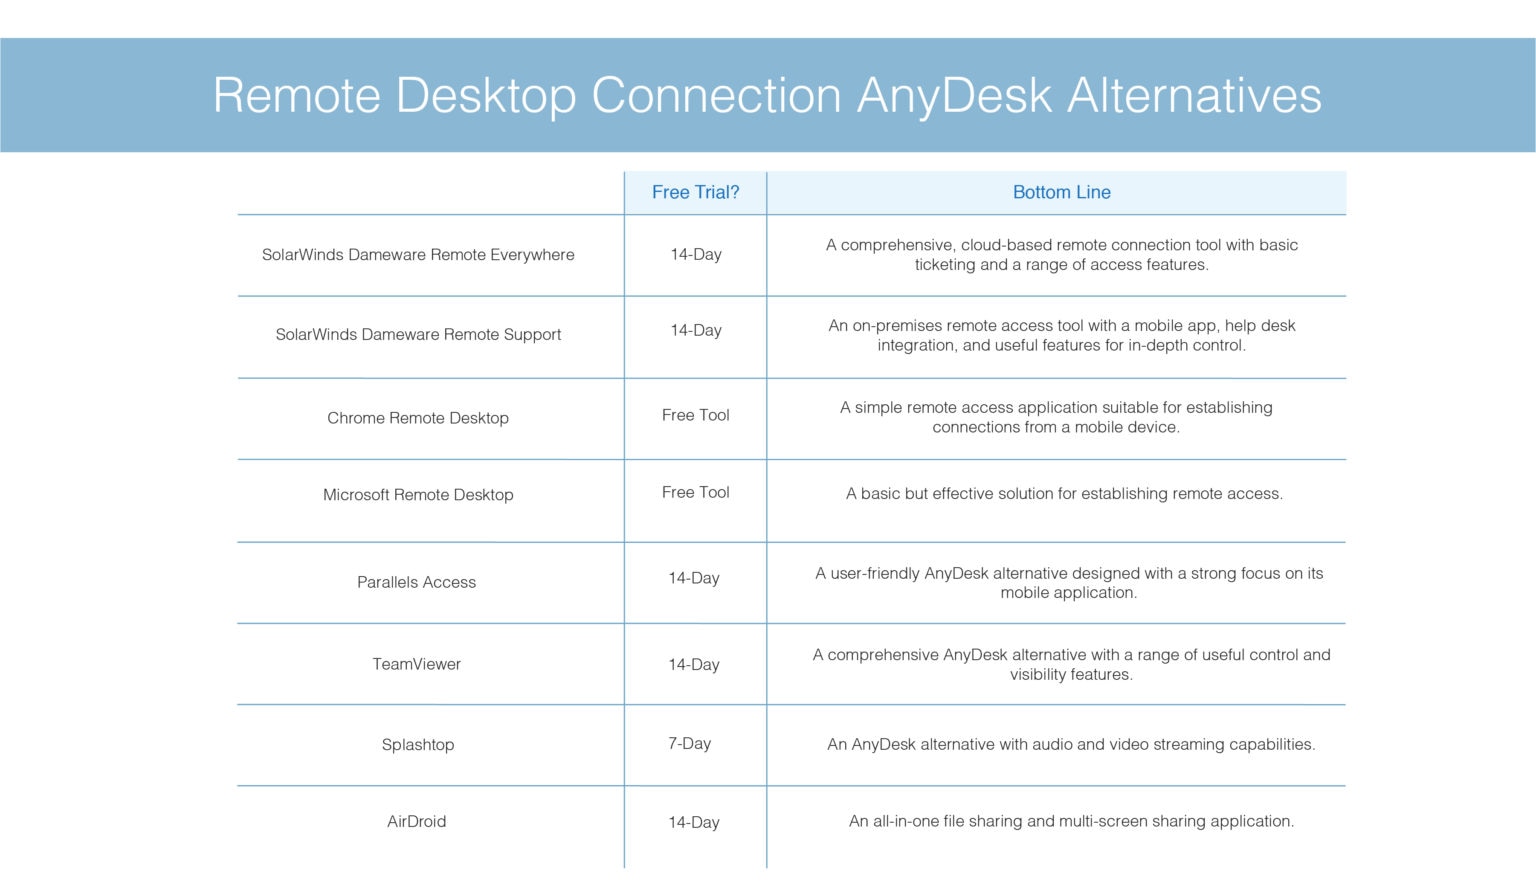 anydesk internet speed requirements